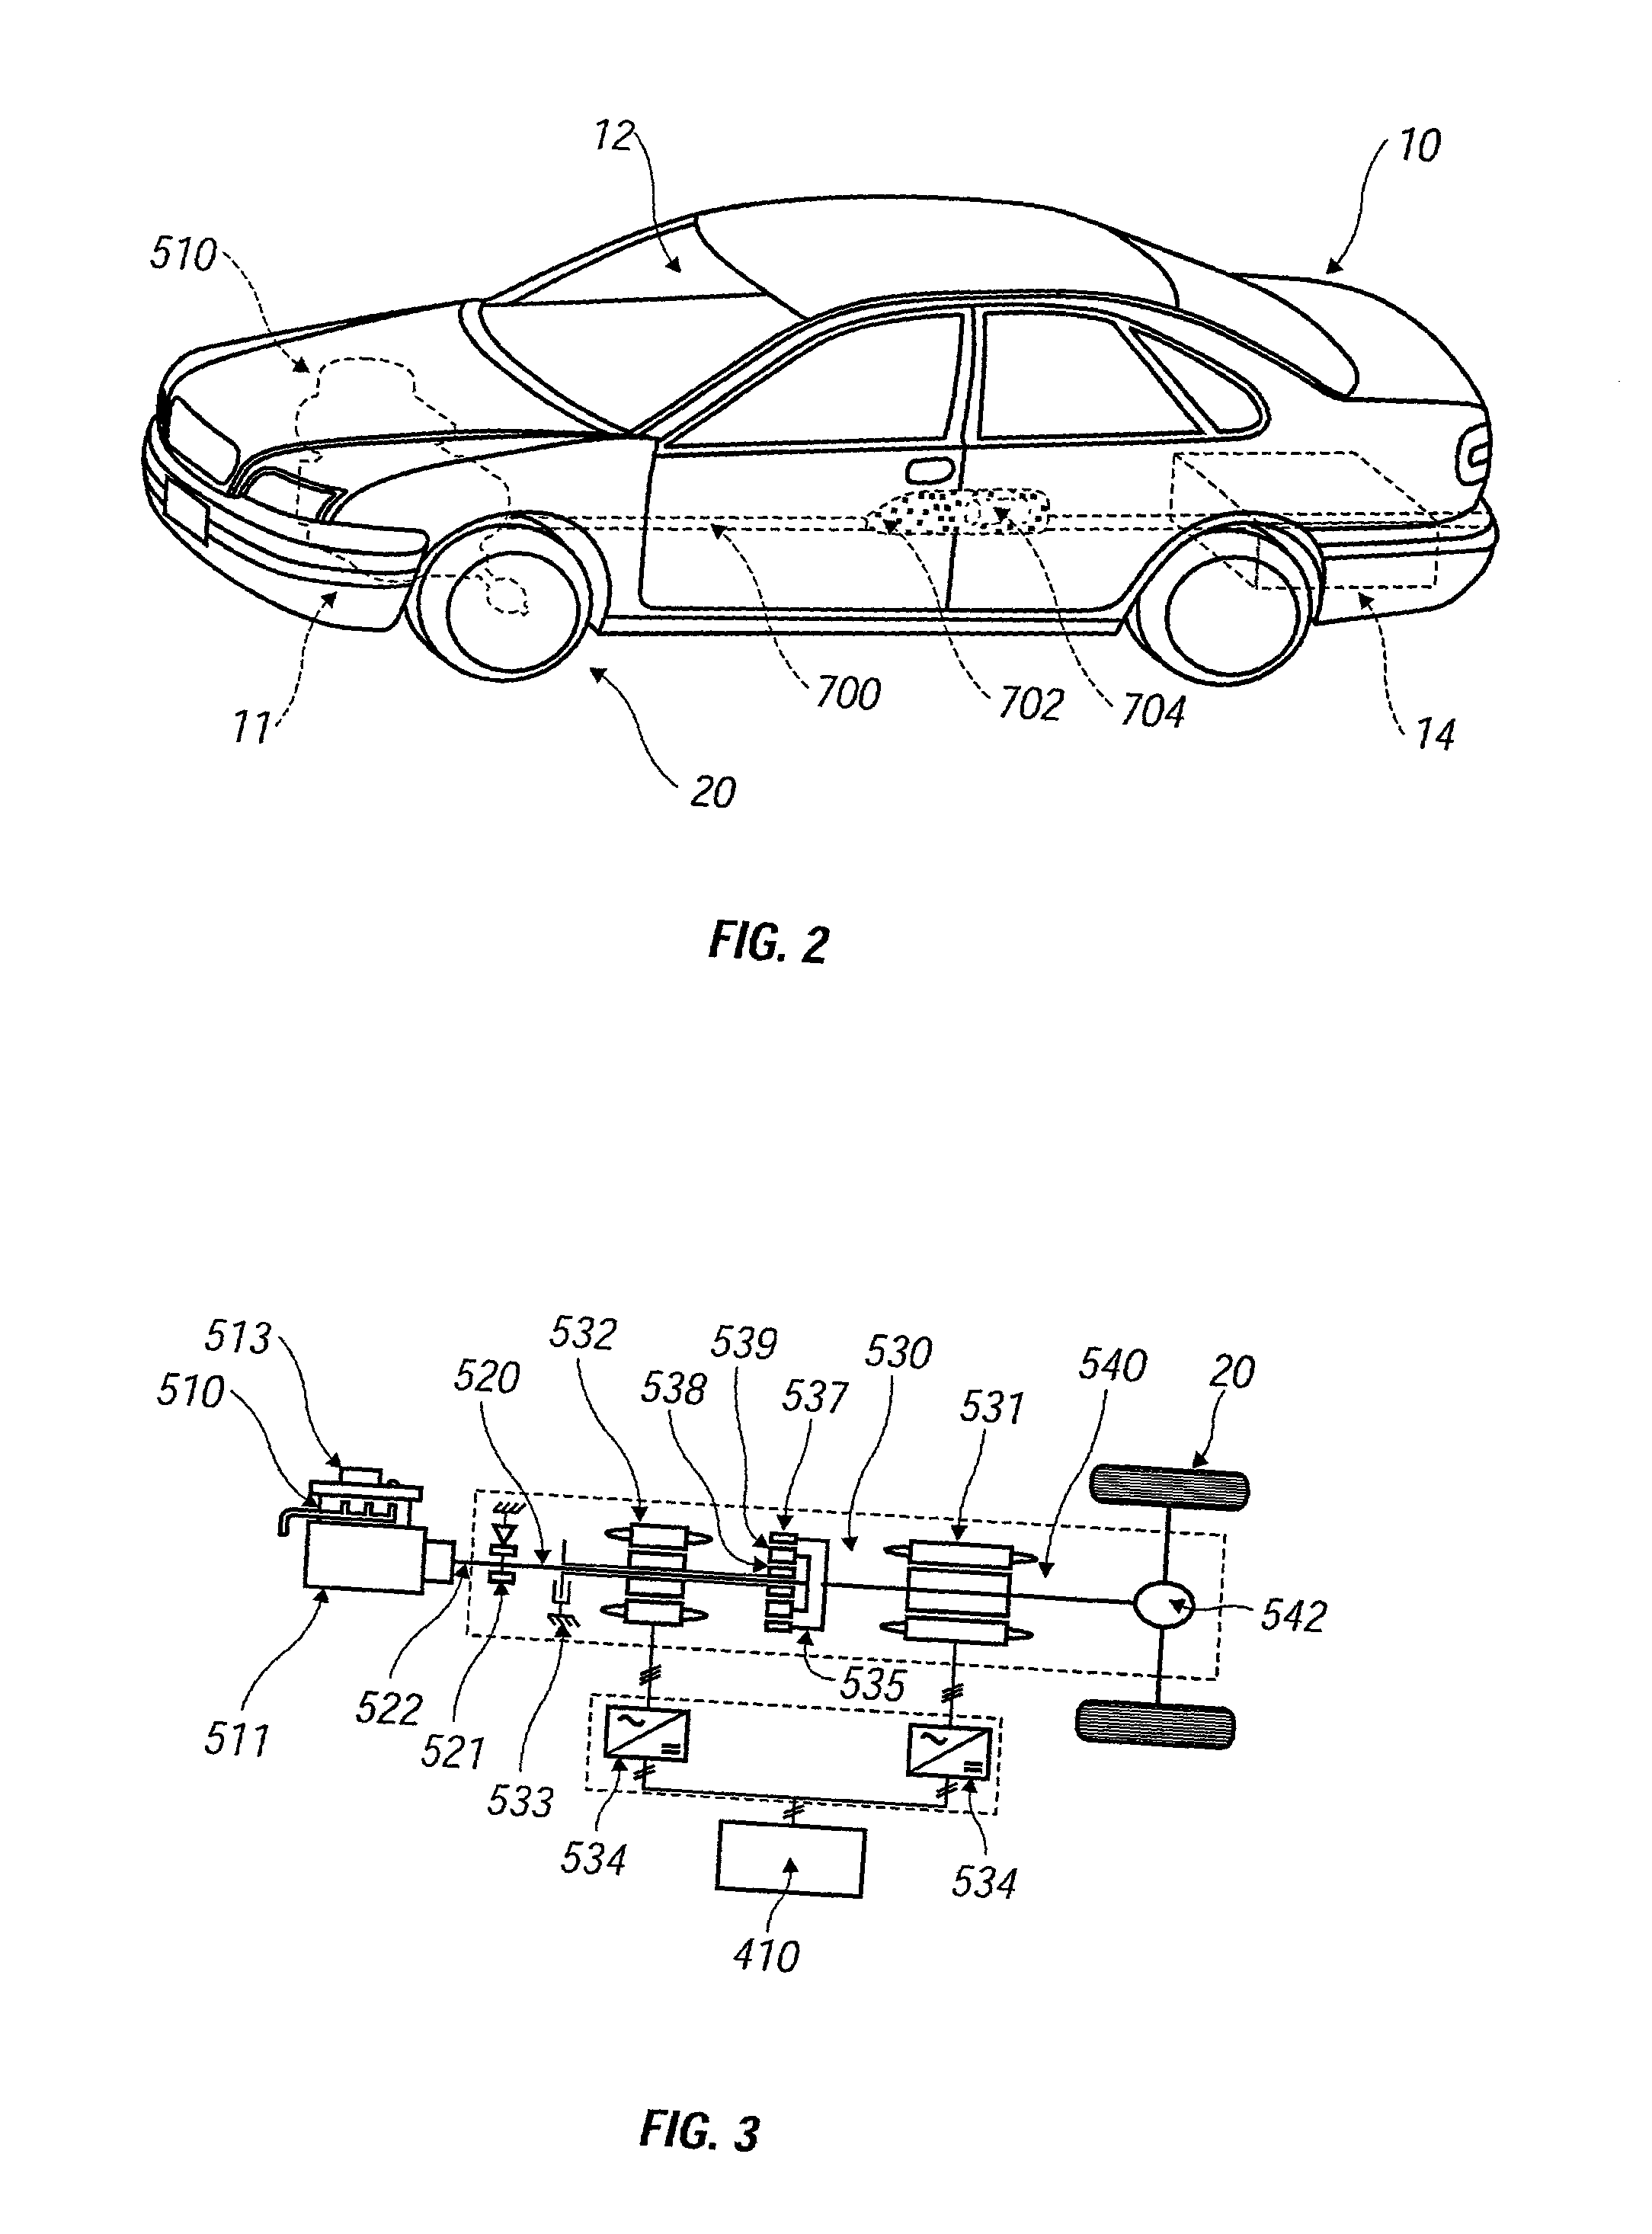 Method and arrangement in a hybrid vehicle for initiating early engine operation during take-off conditions